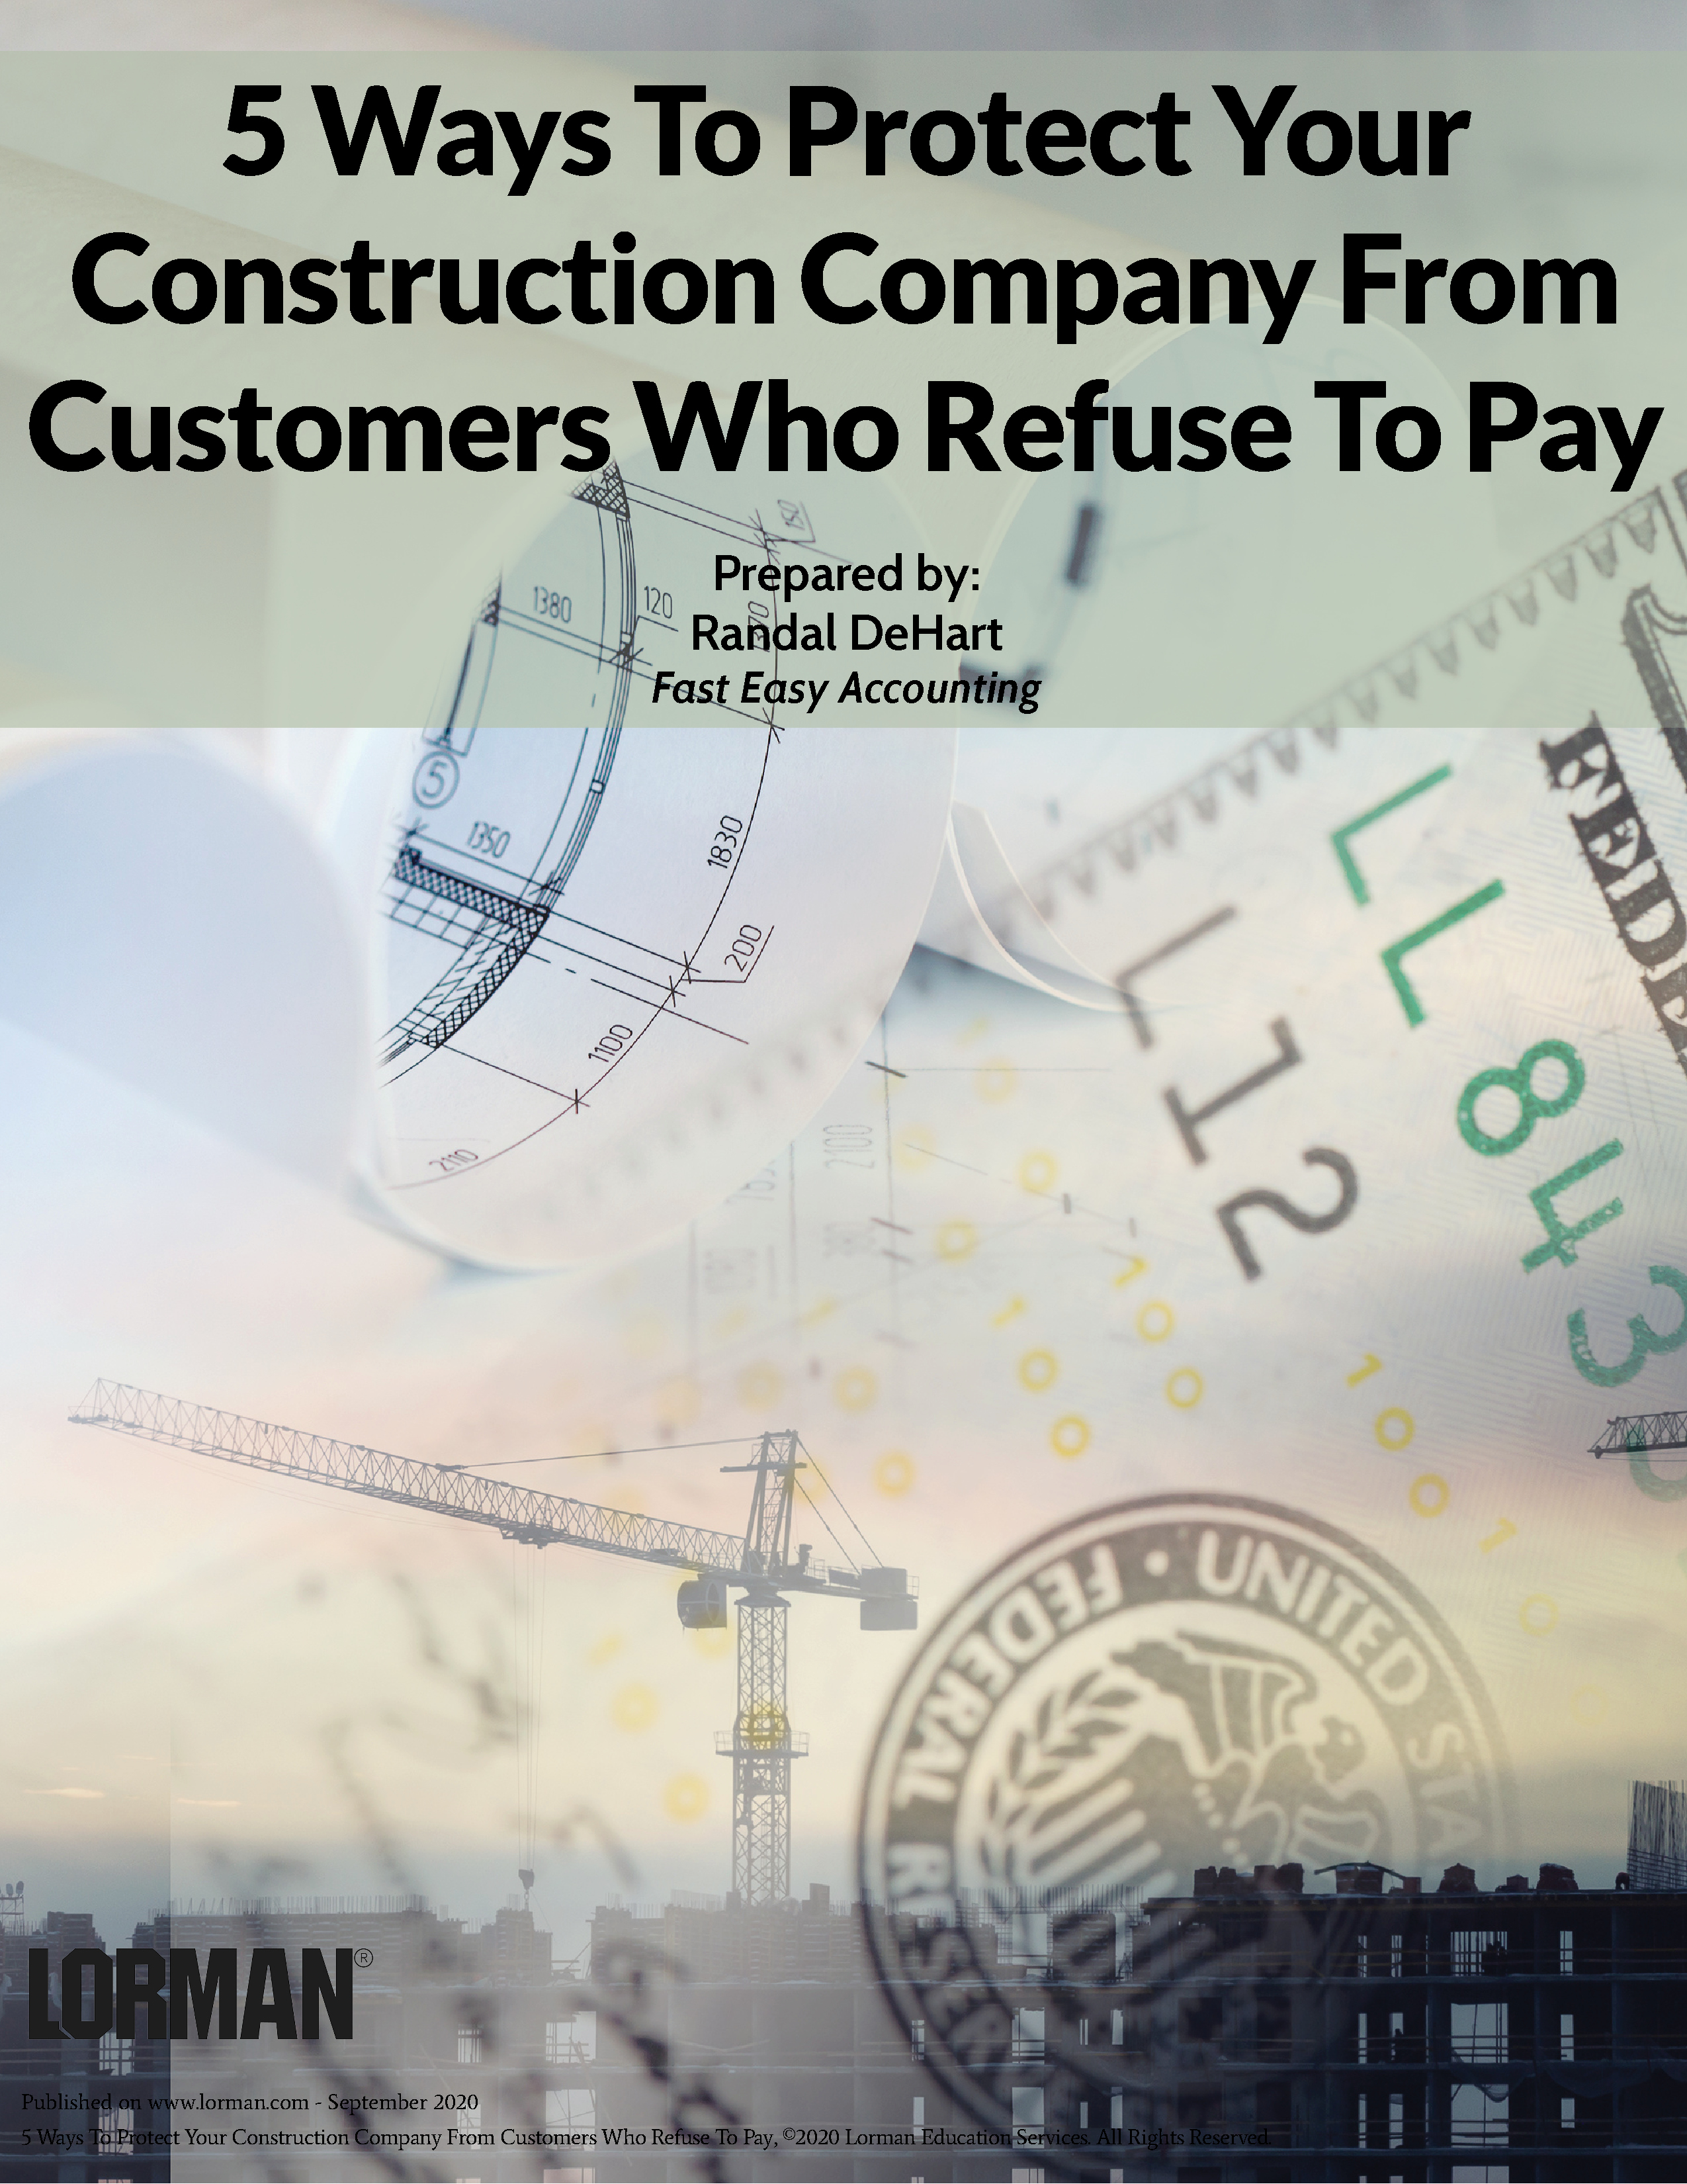 5 Ways To Protect Your Construction Company From Customers Who Refuse To Pay